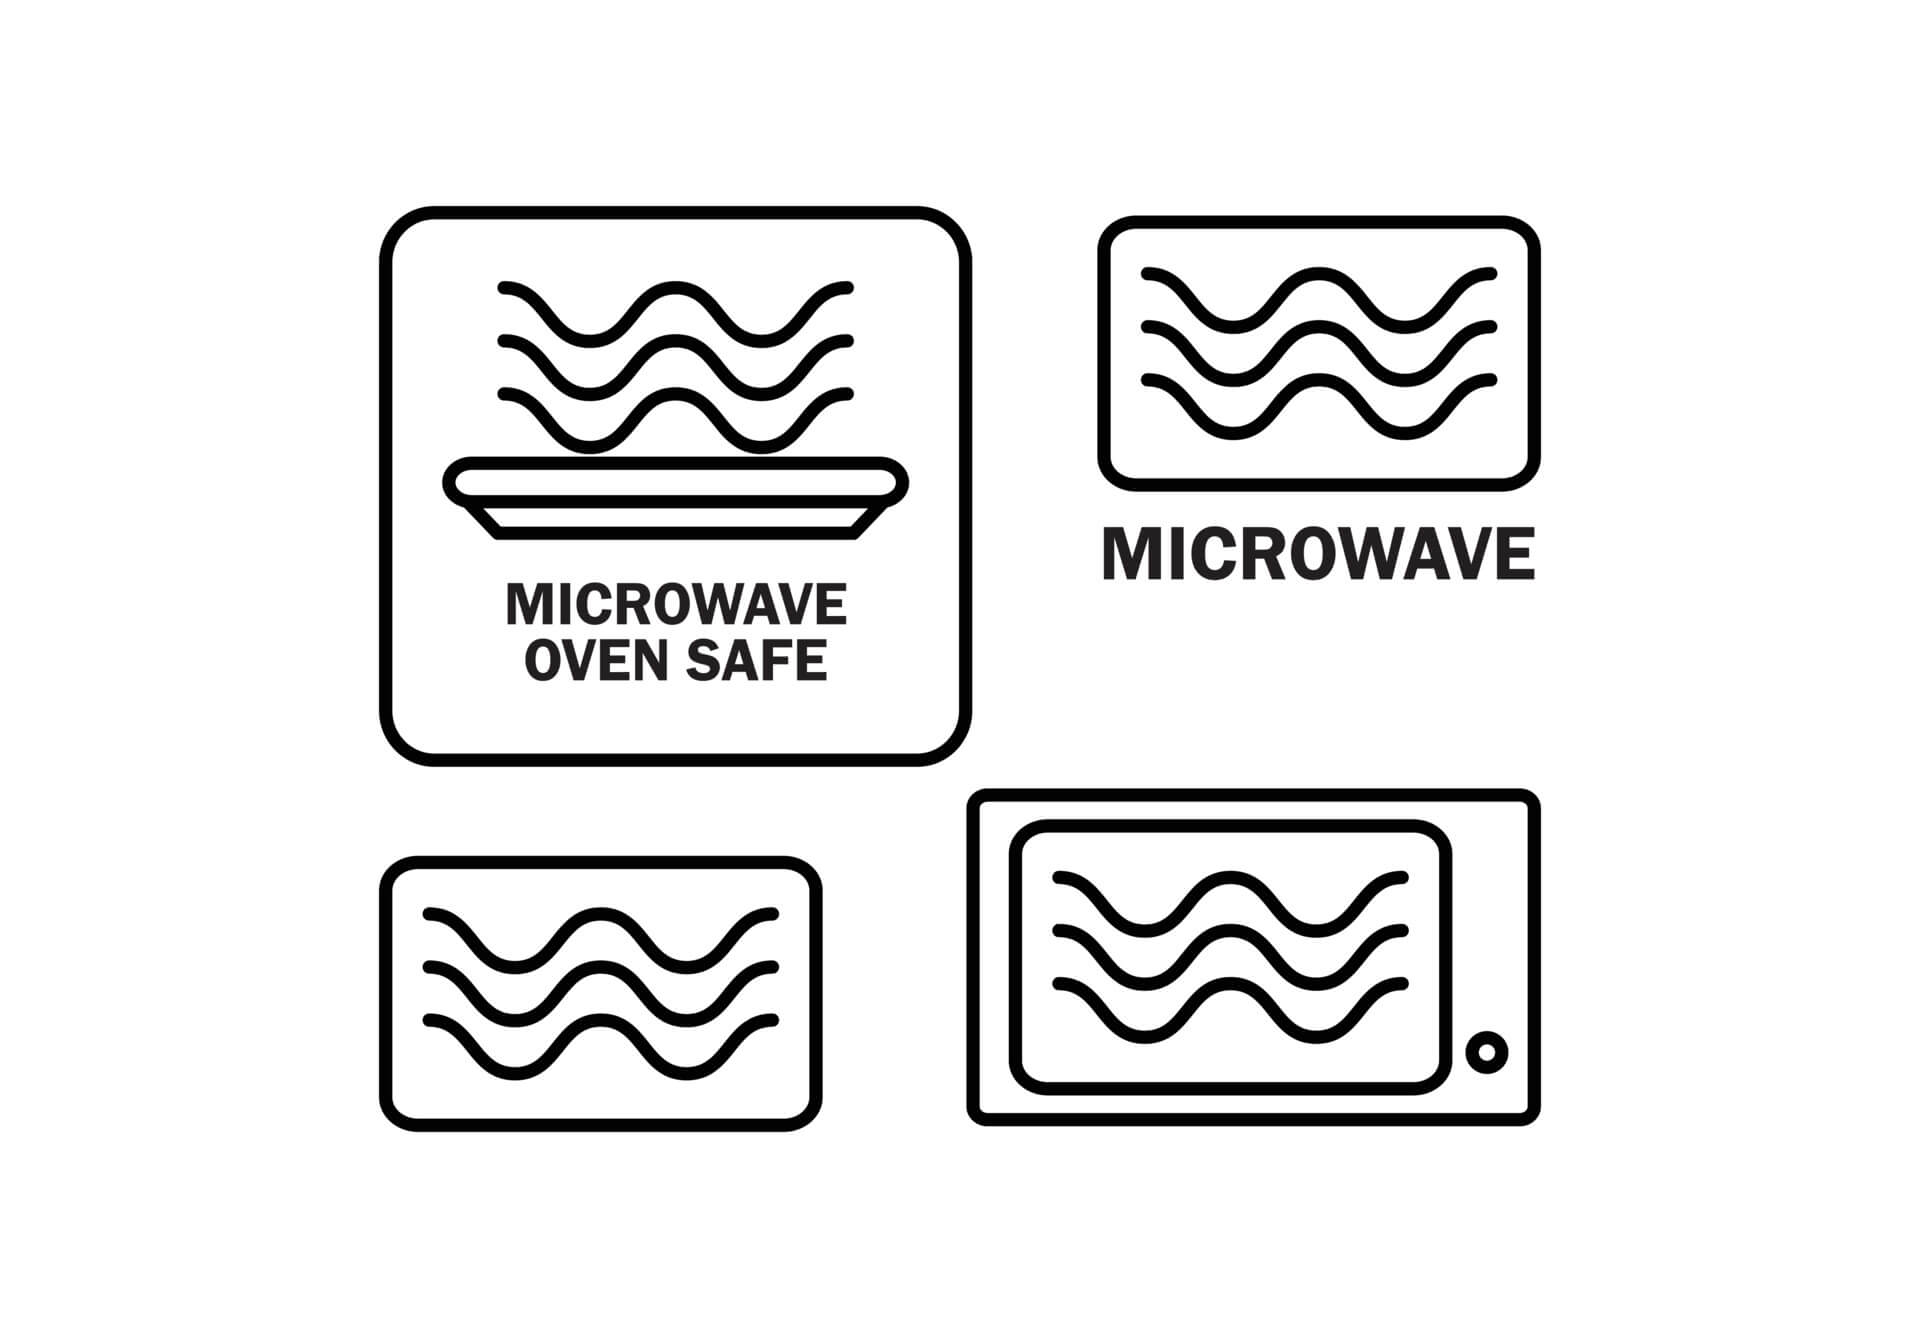 Microwave oven safe icon